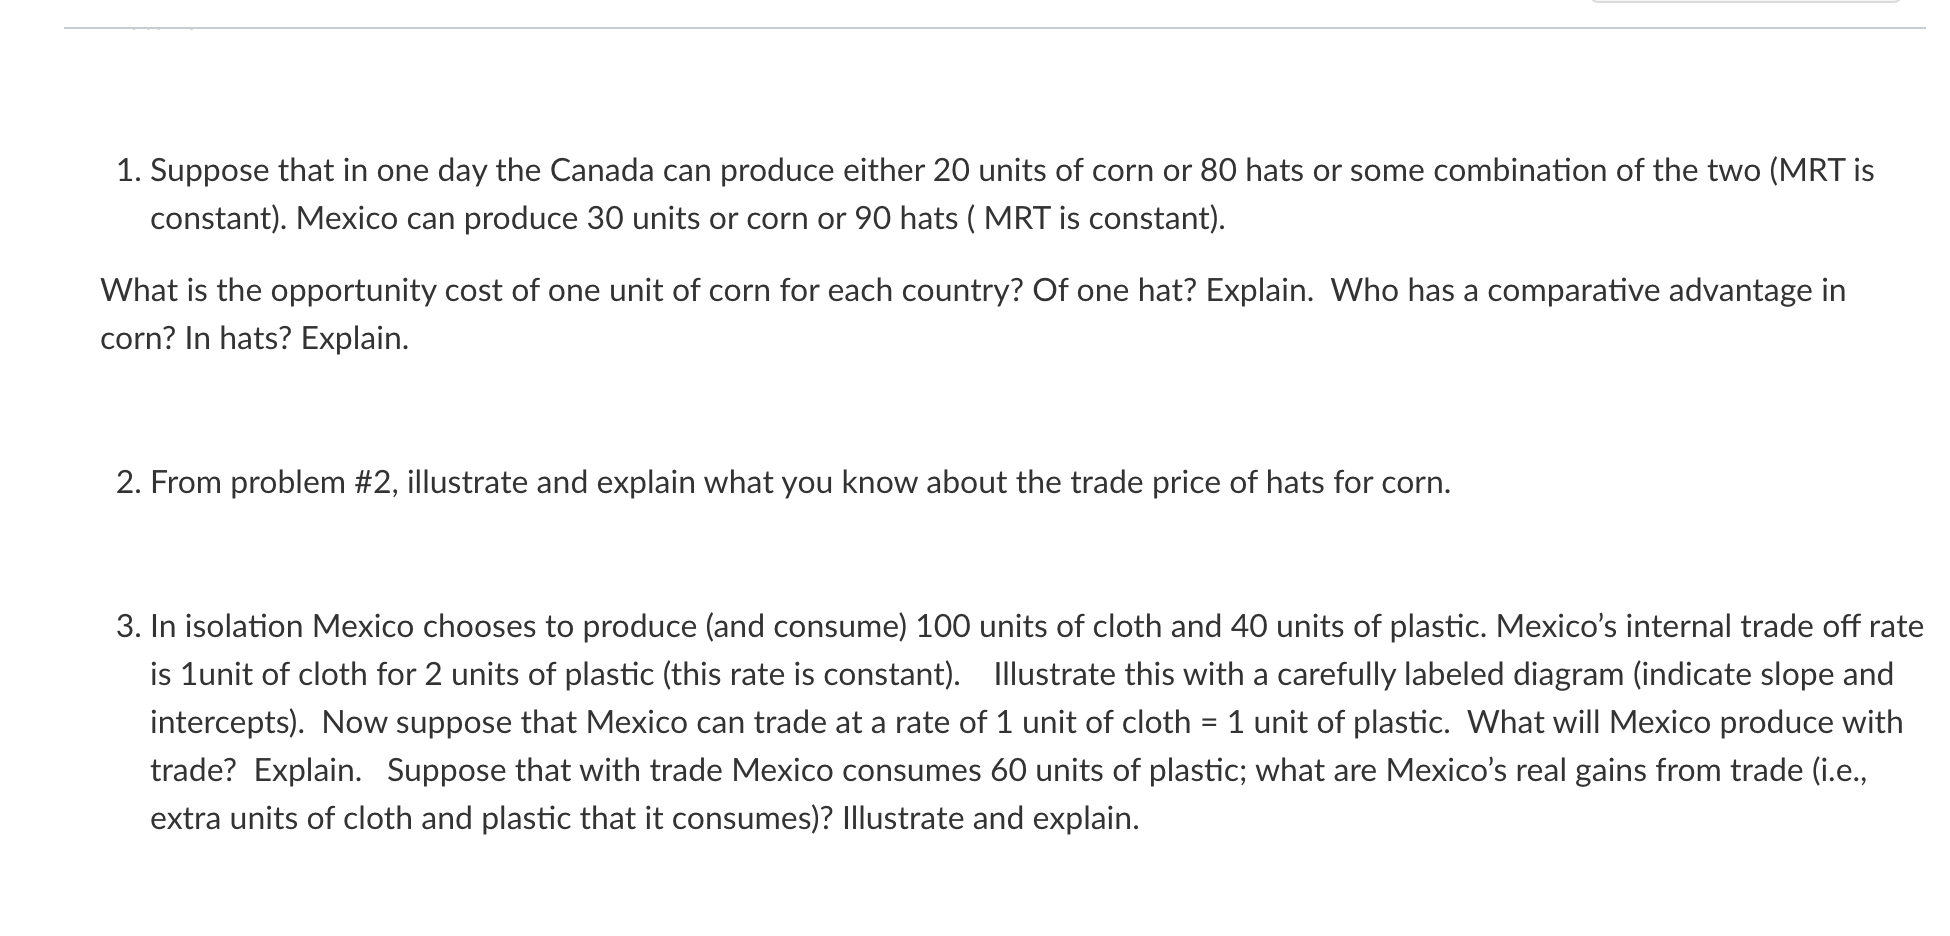 1. Suppose that in one day the Canada can produce either 20 units of corn or 80 hats or some combination of the two (MRT is c